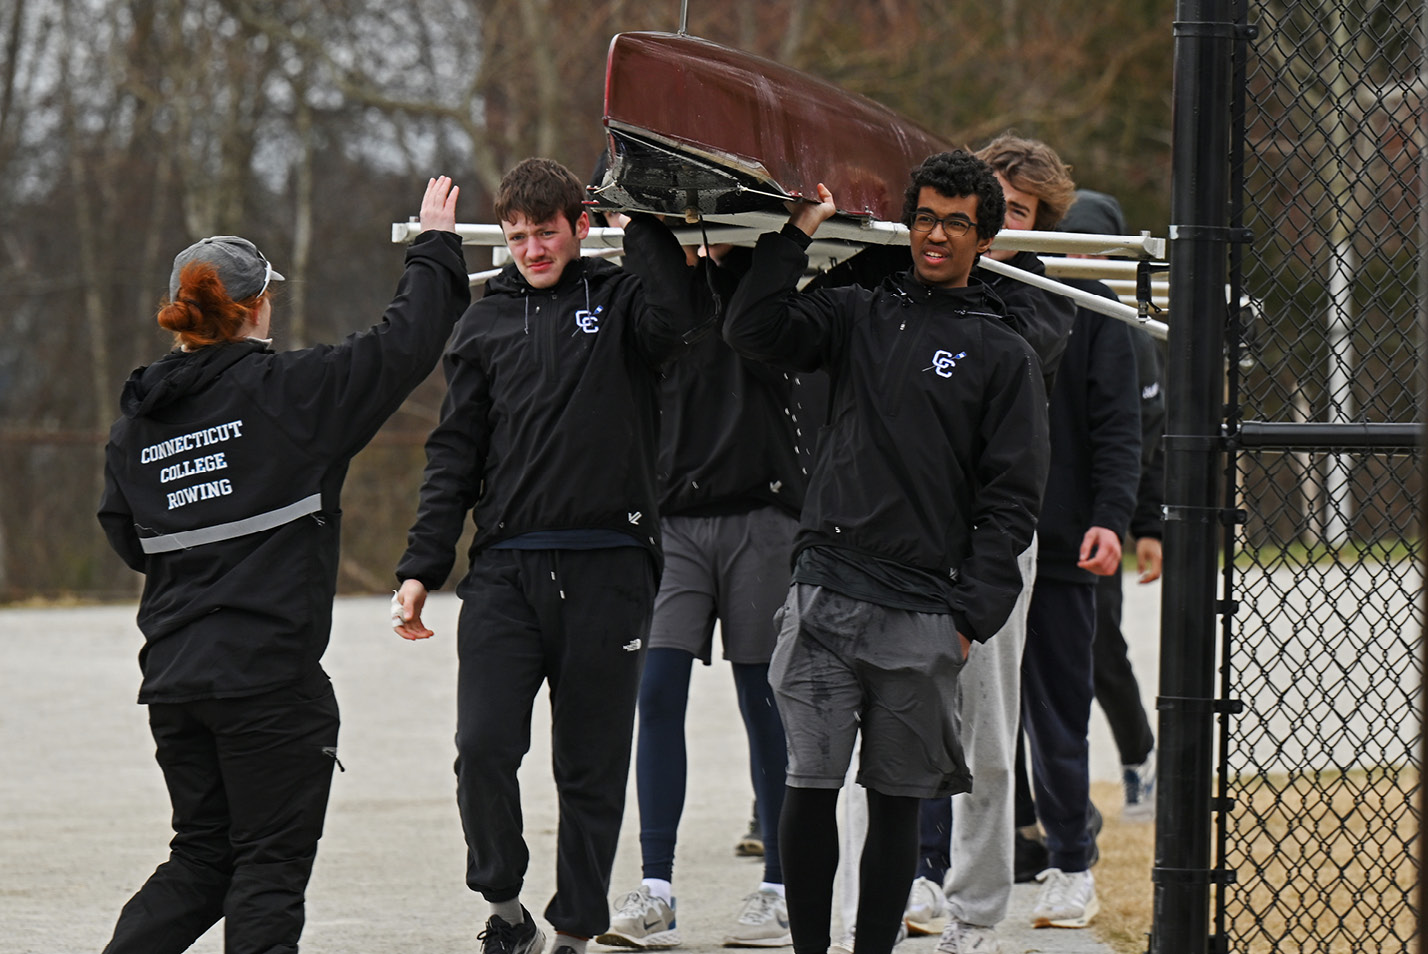 The Connecticut College men’s rowing team returns from a practice on the Thames River